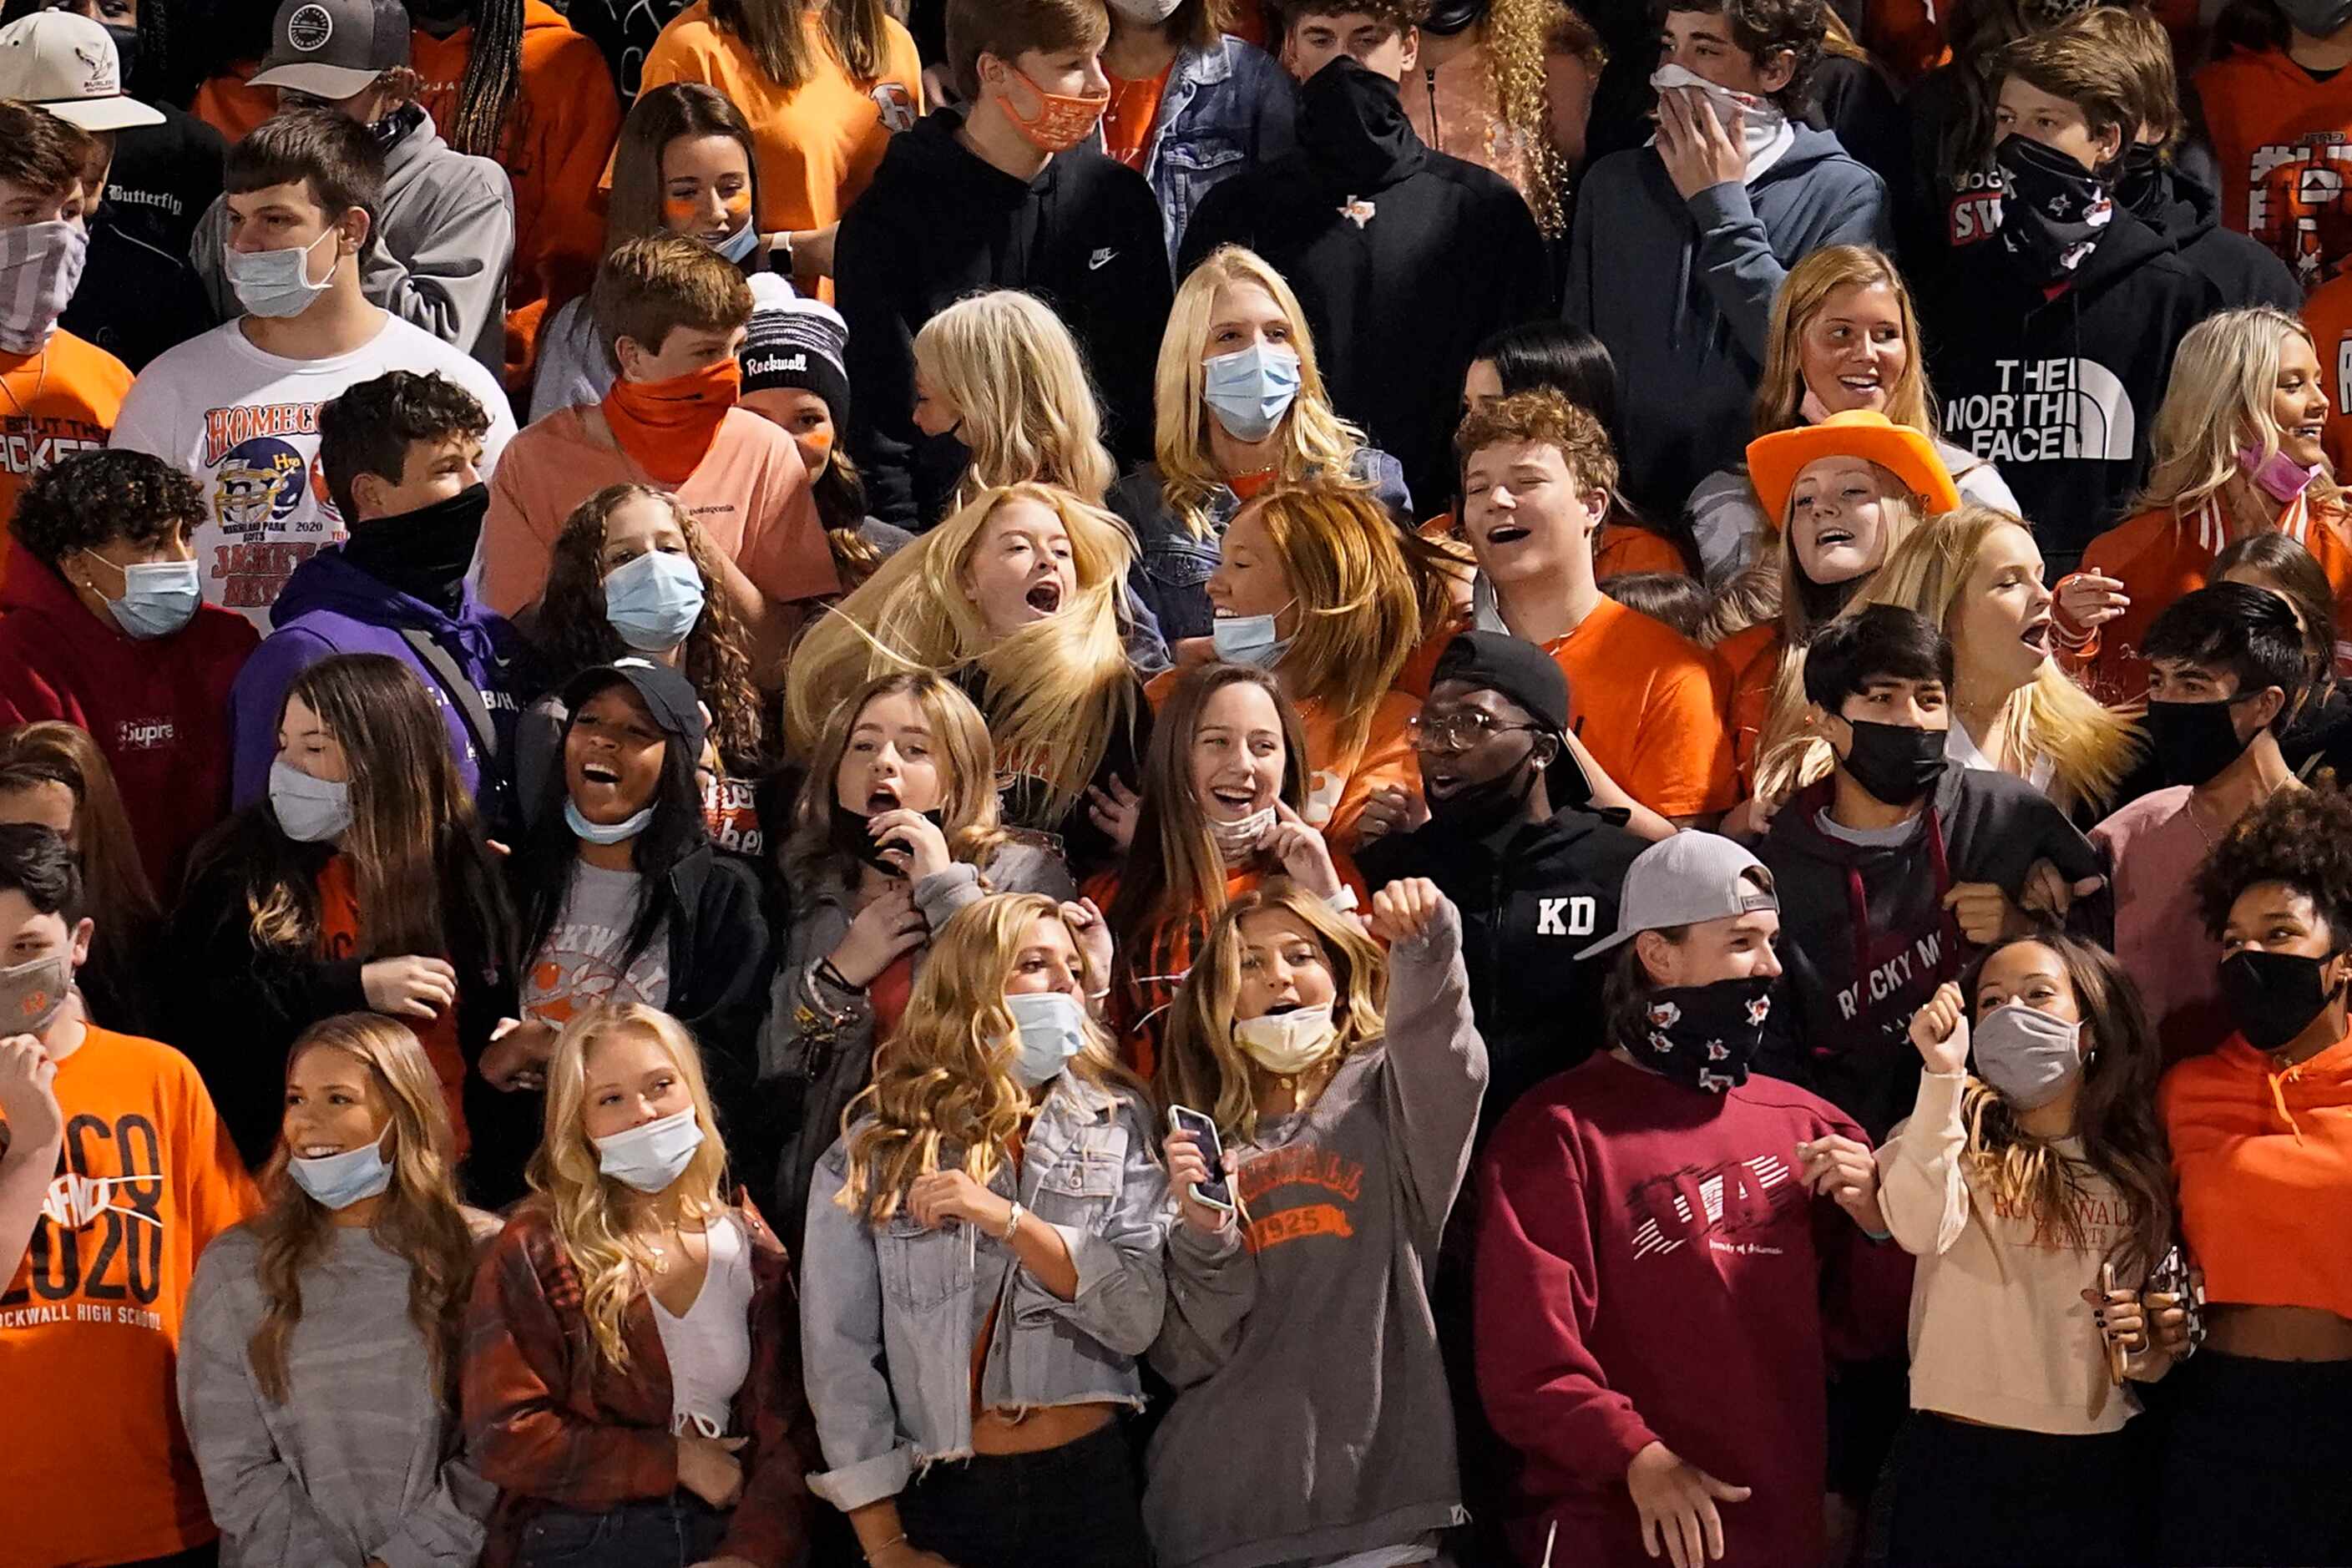 Rockwall students cheer as their team takes the field before a high school football game...